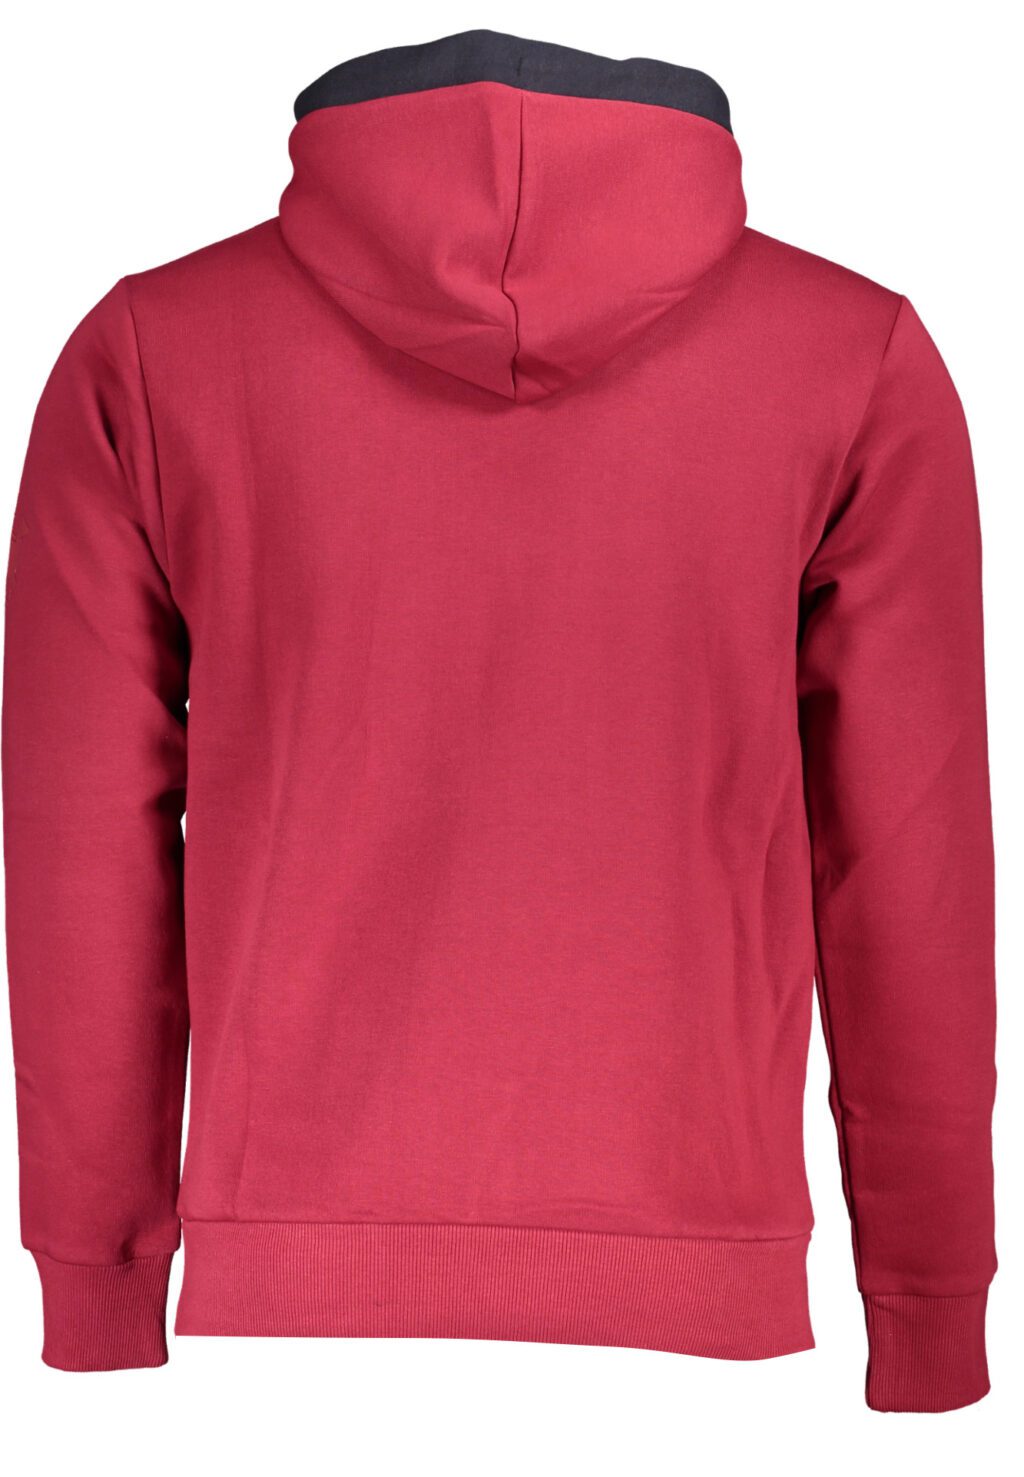 US GRAND POLO MEN'S RED ZIP-OUT SWEATSHIRT USF901_ROROSSO